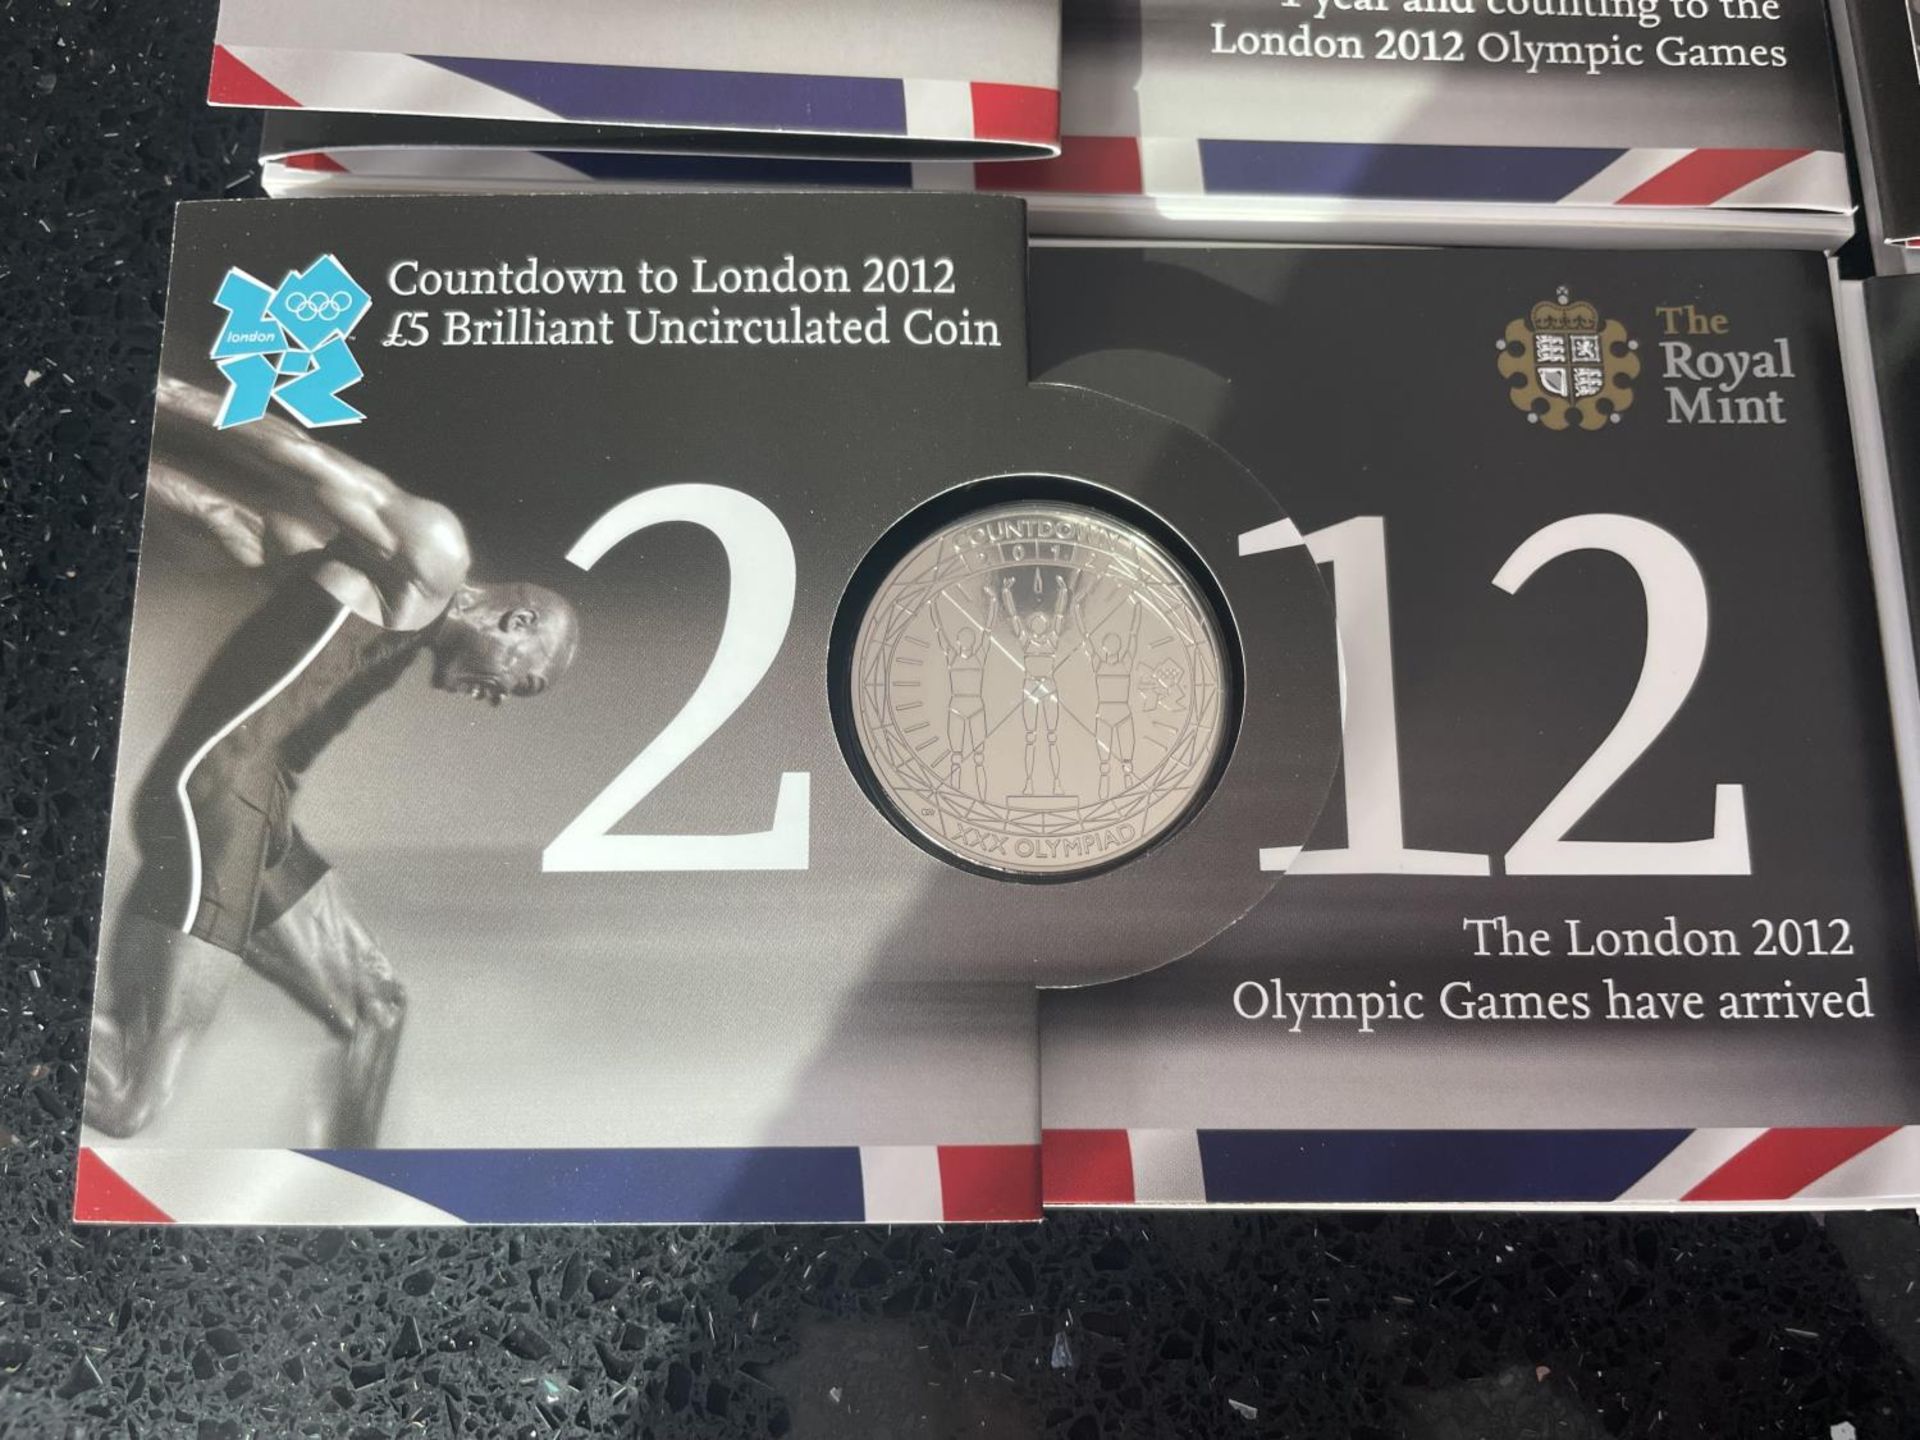 THE COMPLETE COLLECTION “COUNTDOWN LONDON 2012” 4 X £5 BRILLIANT, UNCIRCULATED COINS - Image 7 of 8